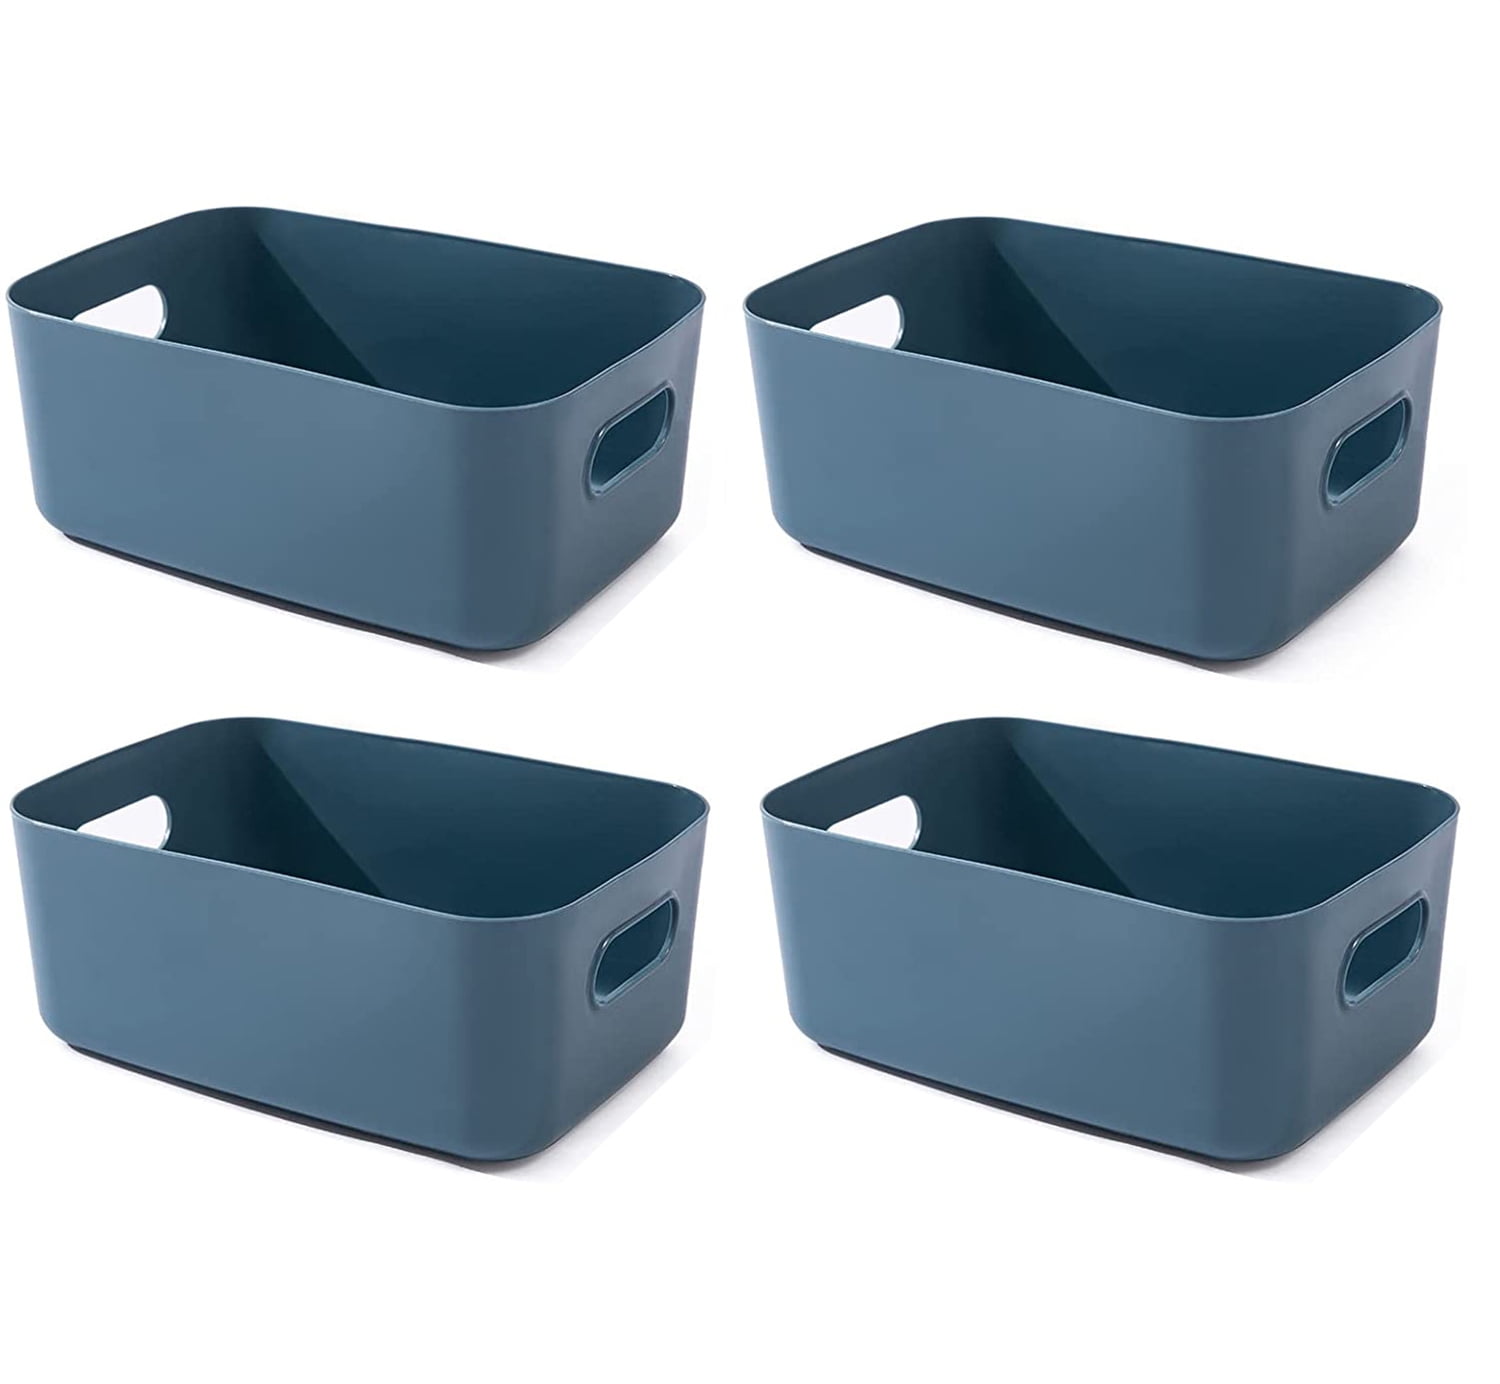 CertBuy 3 Pack Plastic Storage Baskets 14 x 10 x 4.5 Inch, Large Weave  Storage Bins with Handle for Cabinet, Shelf, Kitchen, Bedroom, Bathroom and